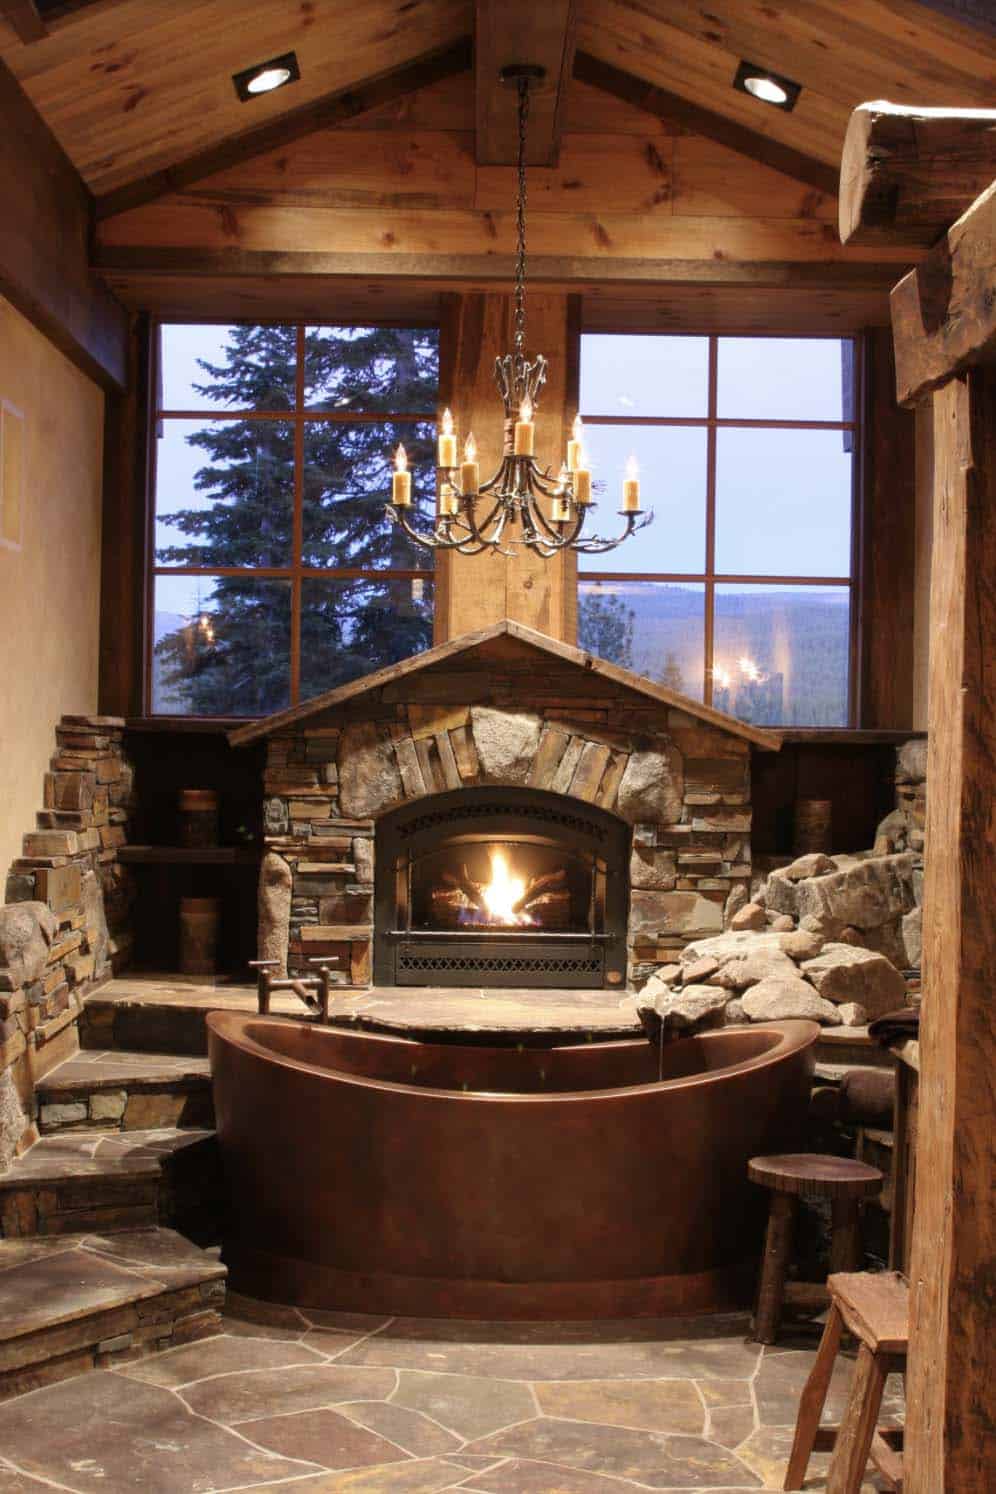 Rustic bathroom with copper tub and fireplace